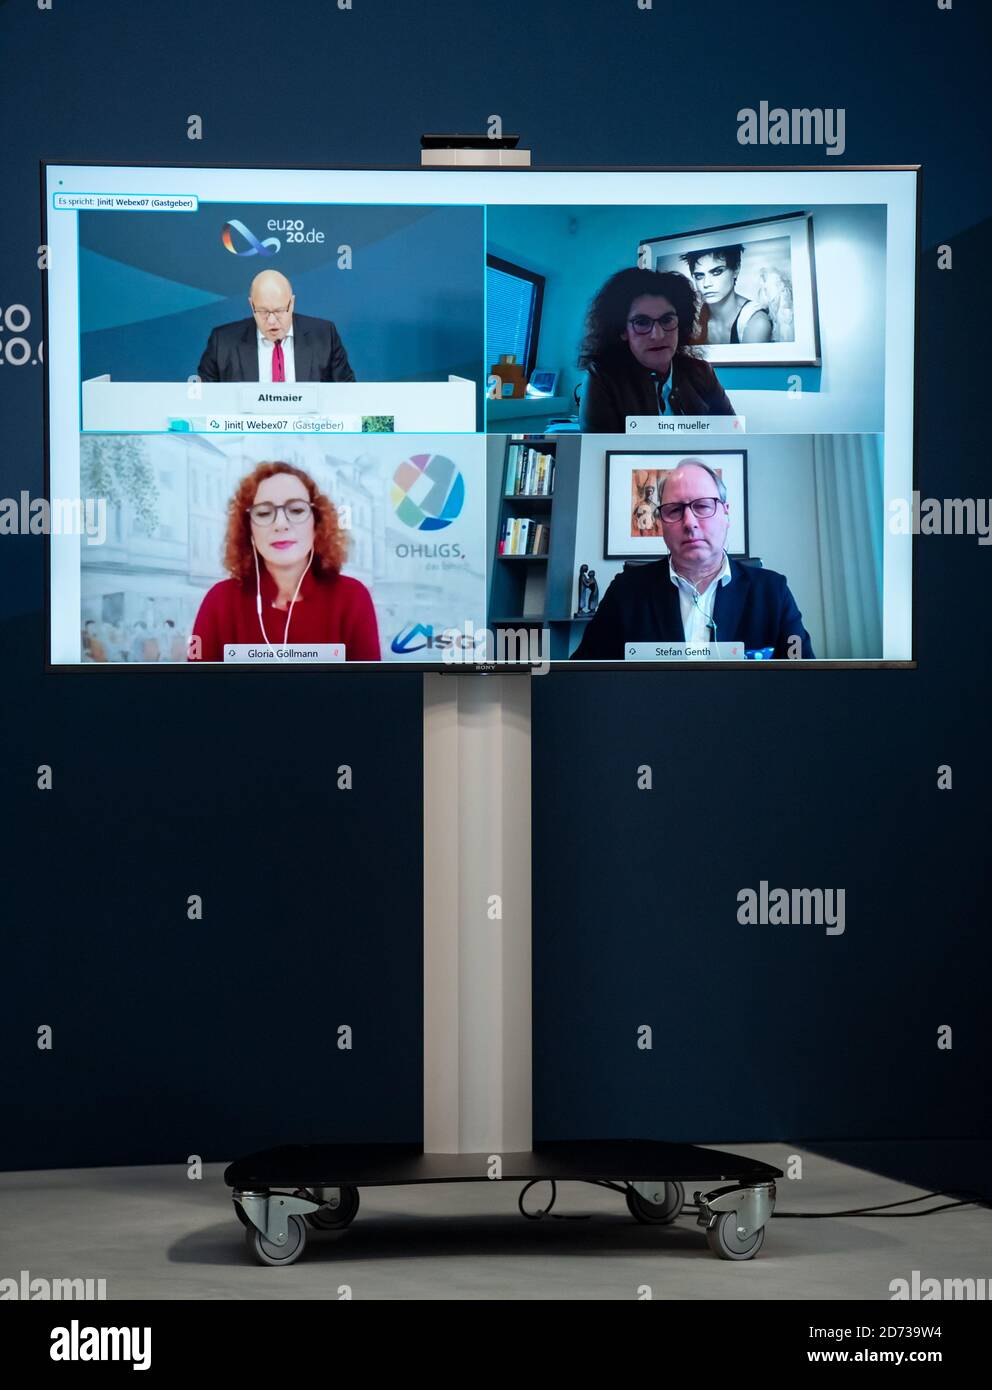 20 October 2020, Berlin: Peter Altmaier (o.l, CDU), Federal Minister of Economics and Energy, together with the video-connected experts Tina Müller (above right), Chairwoman of the Management Board of Douglas GmbH, Gloria Göllmann (below left), Managing Director of the Sollingen-Ohligs Real Estate and Location Community, and Stefan Genth (below right), Managing Director of the German Retail Association (HDE), spoke at a press conference at the Federal Ministry of Economics on the subject of 'Preventing Shop Deaths - Vital Inner Cities'. With the Round Table, Federal Minister Altmaier wants to Stock Photo